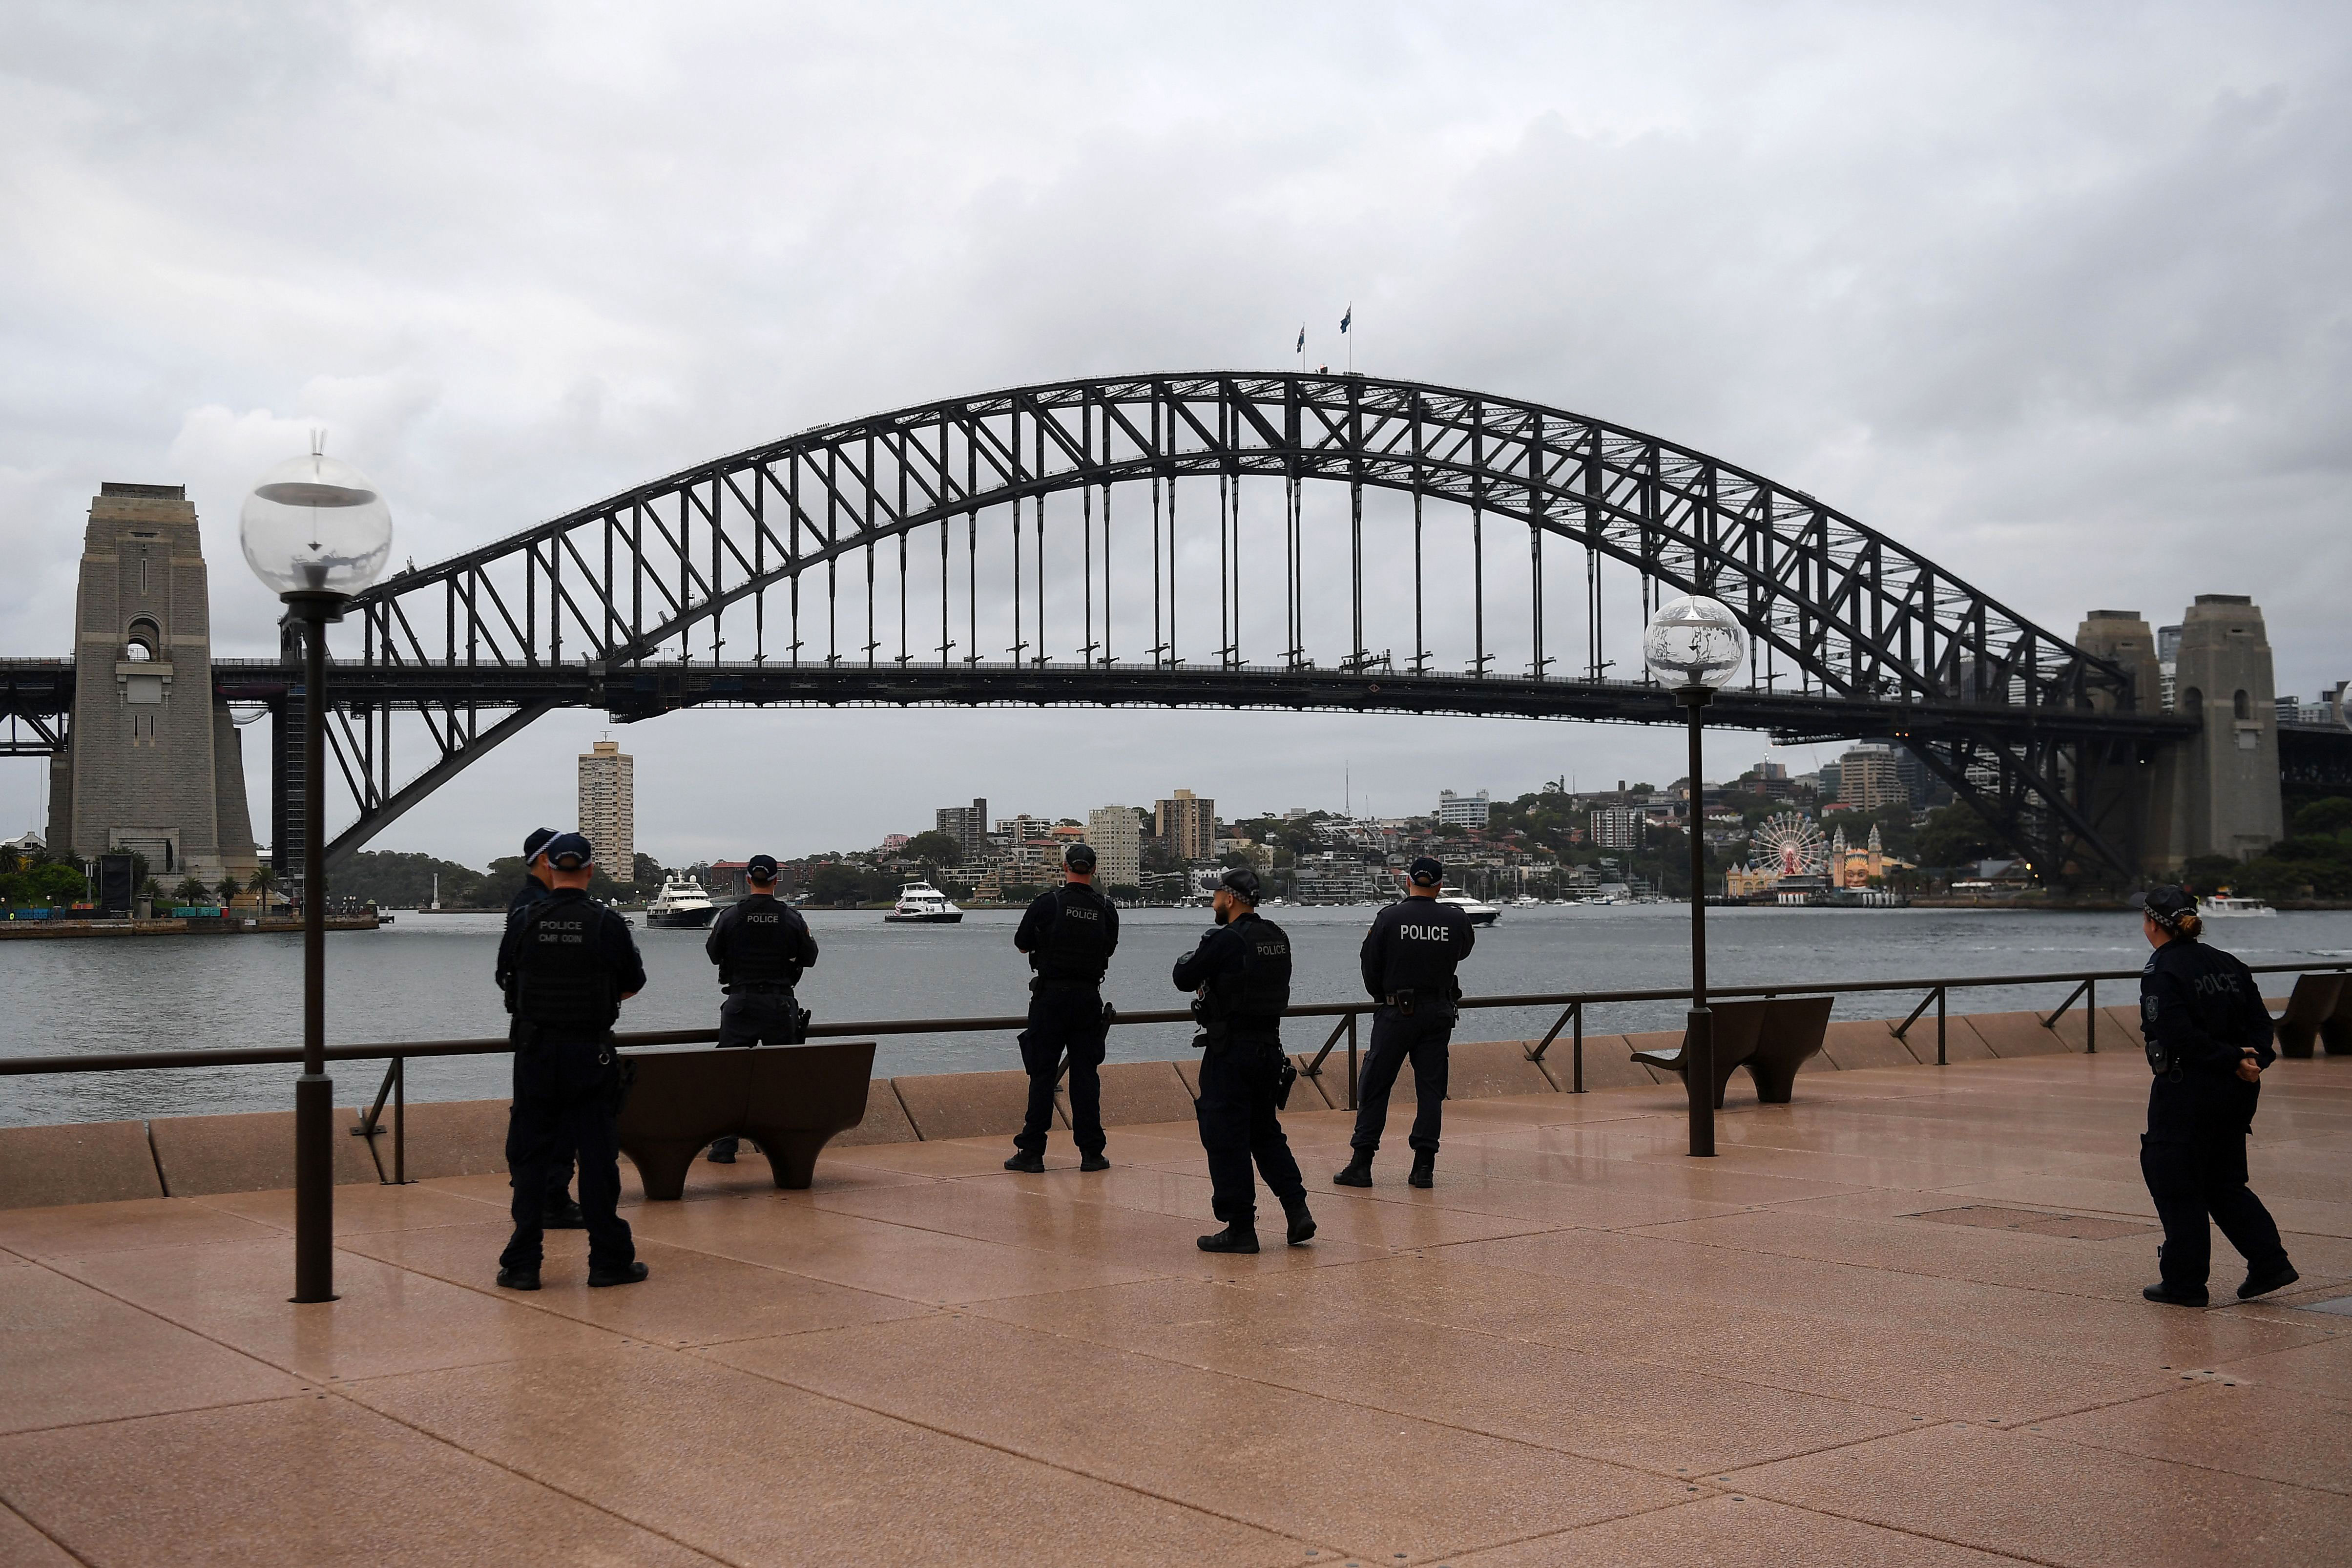 New South Wales police officers patrol near Sydney Opera House in Australia on December 31.